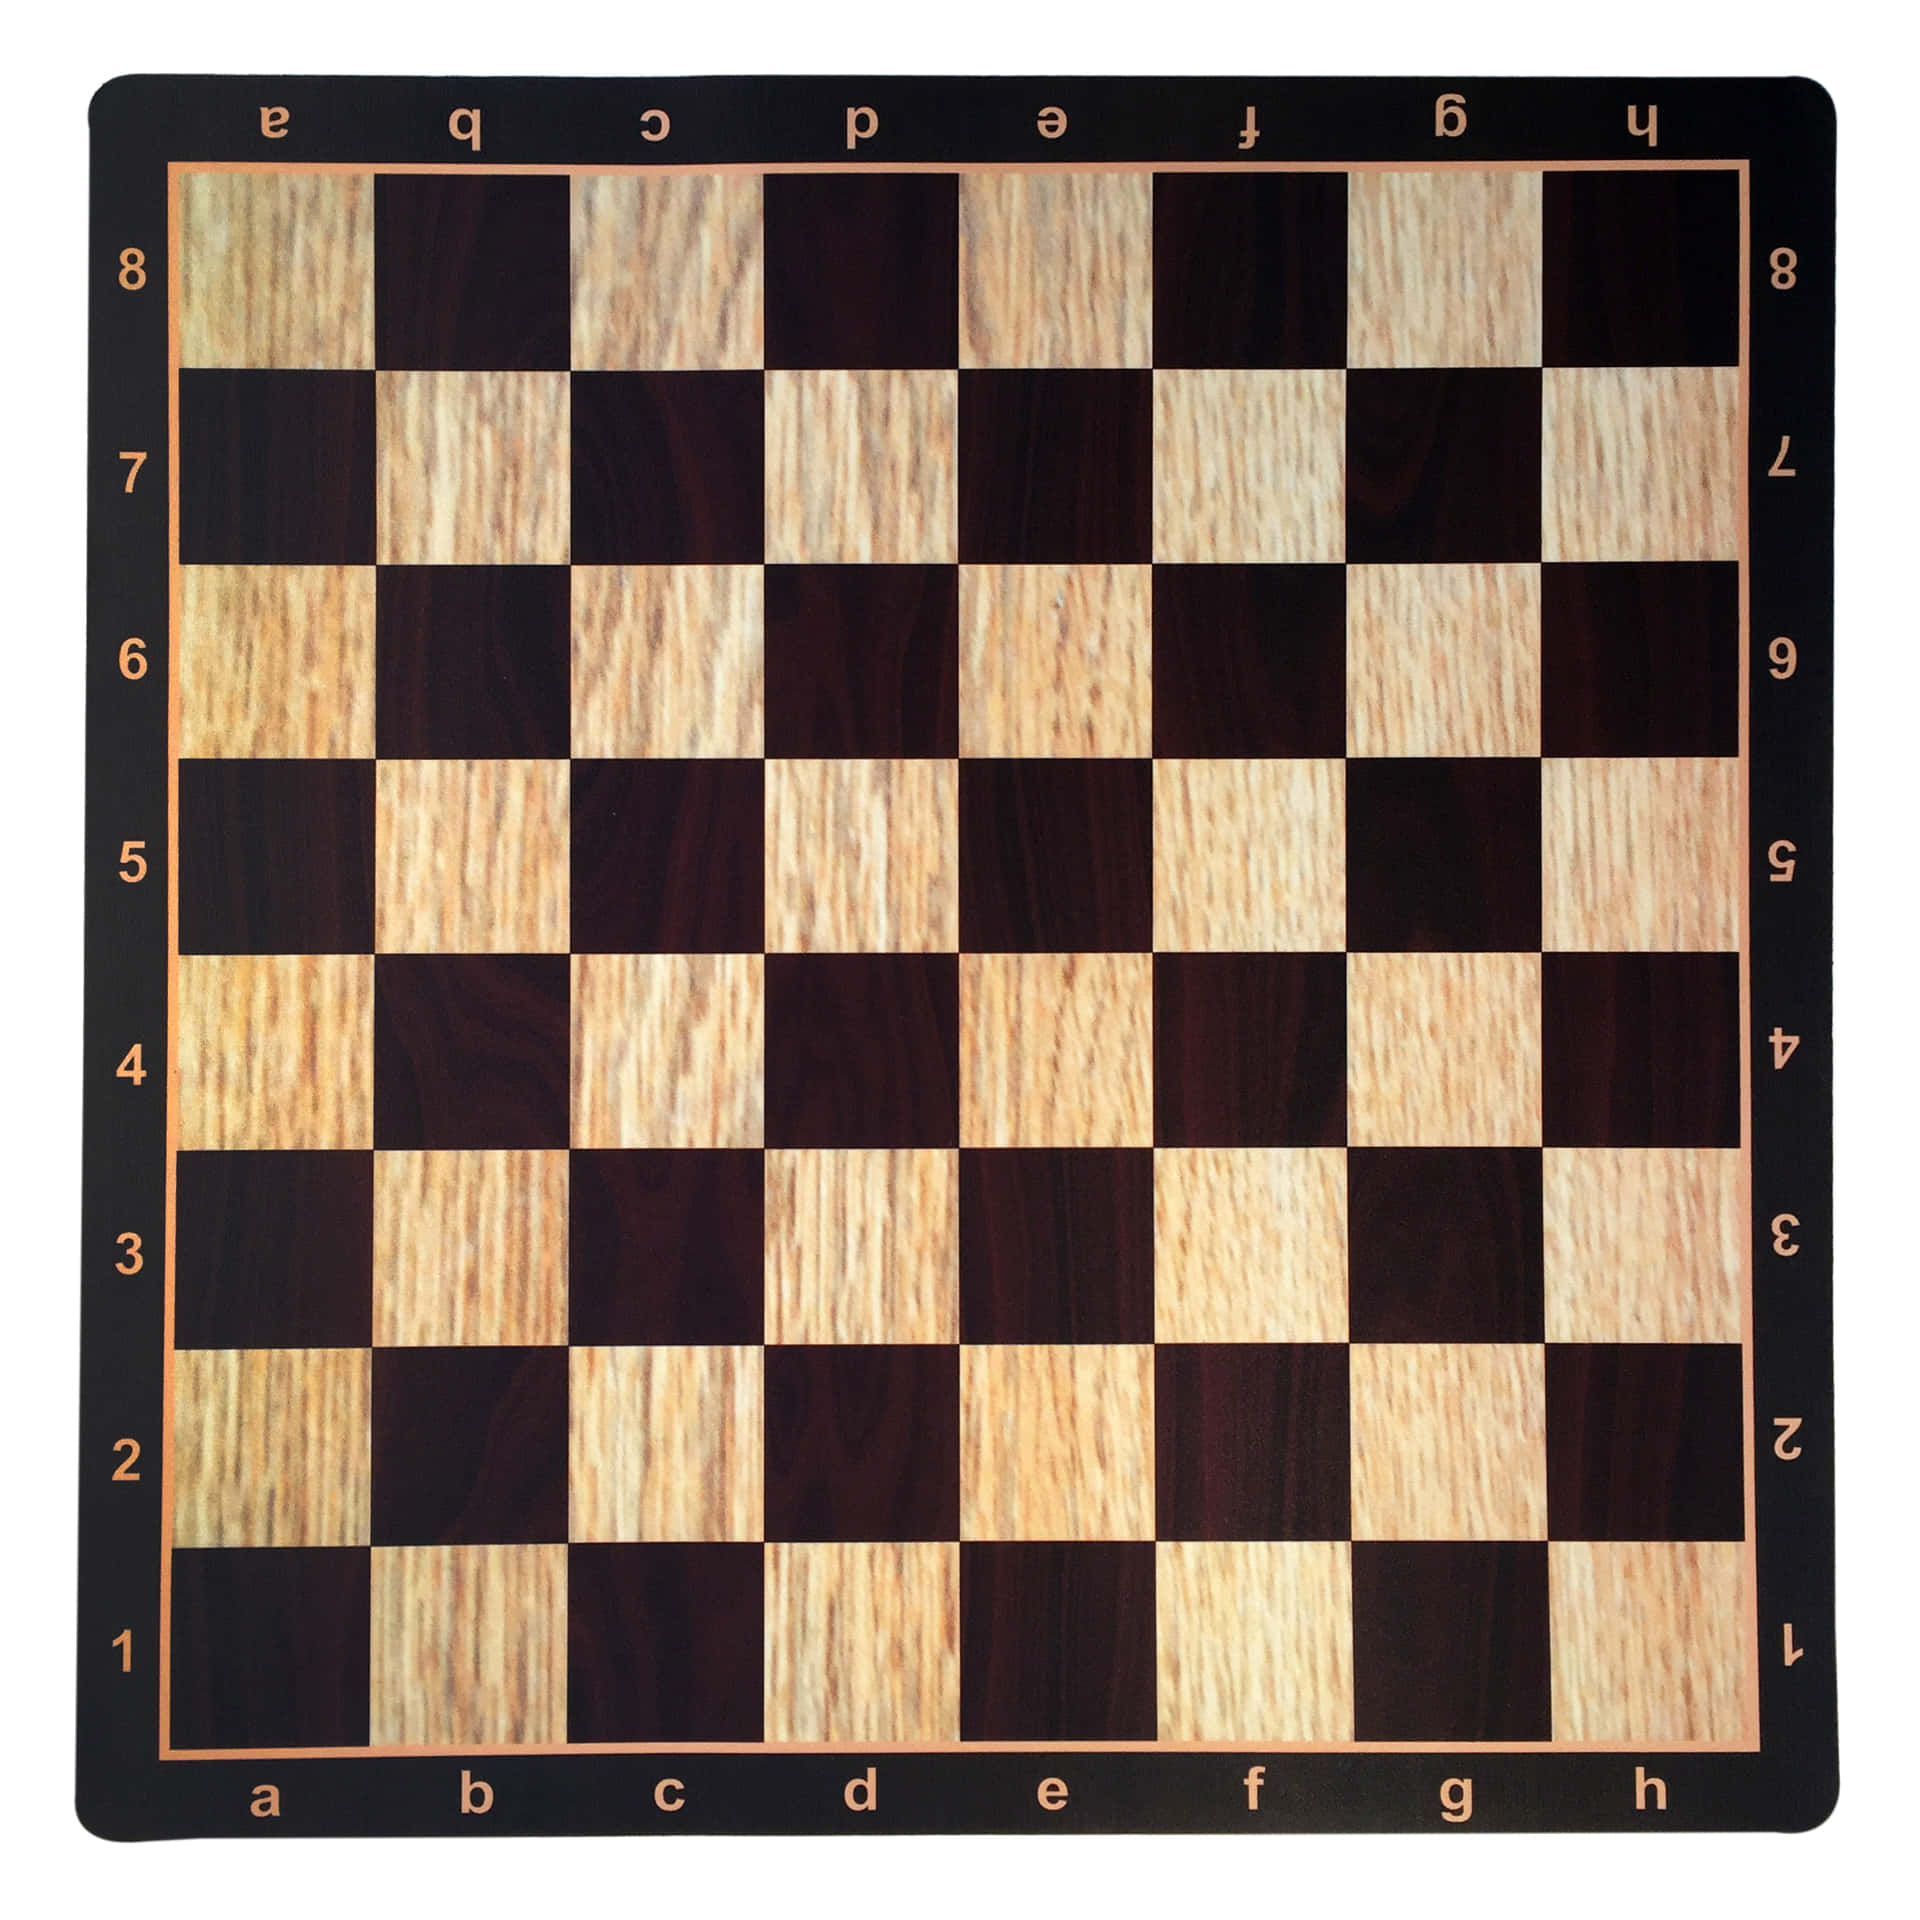 It's Your Move: Get Ready to Take on Any Chess Challenge" Wallpaper